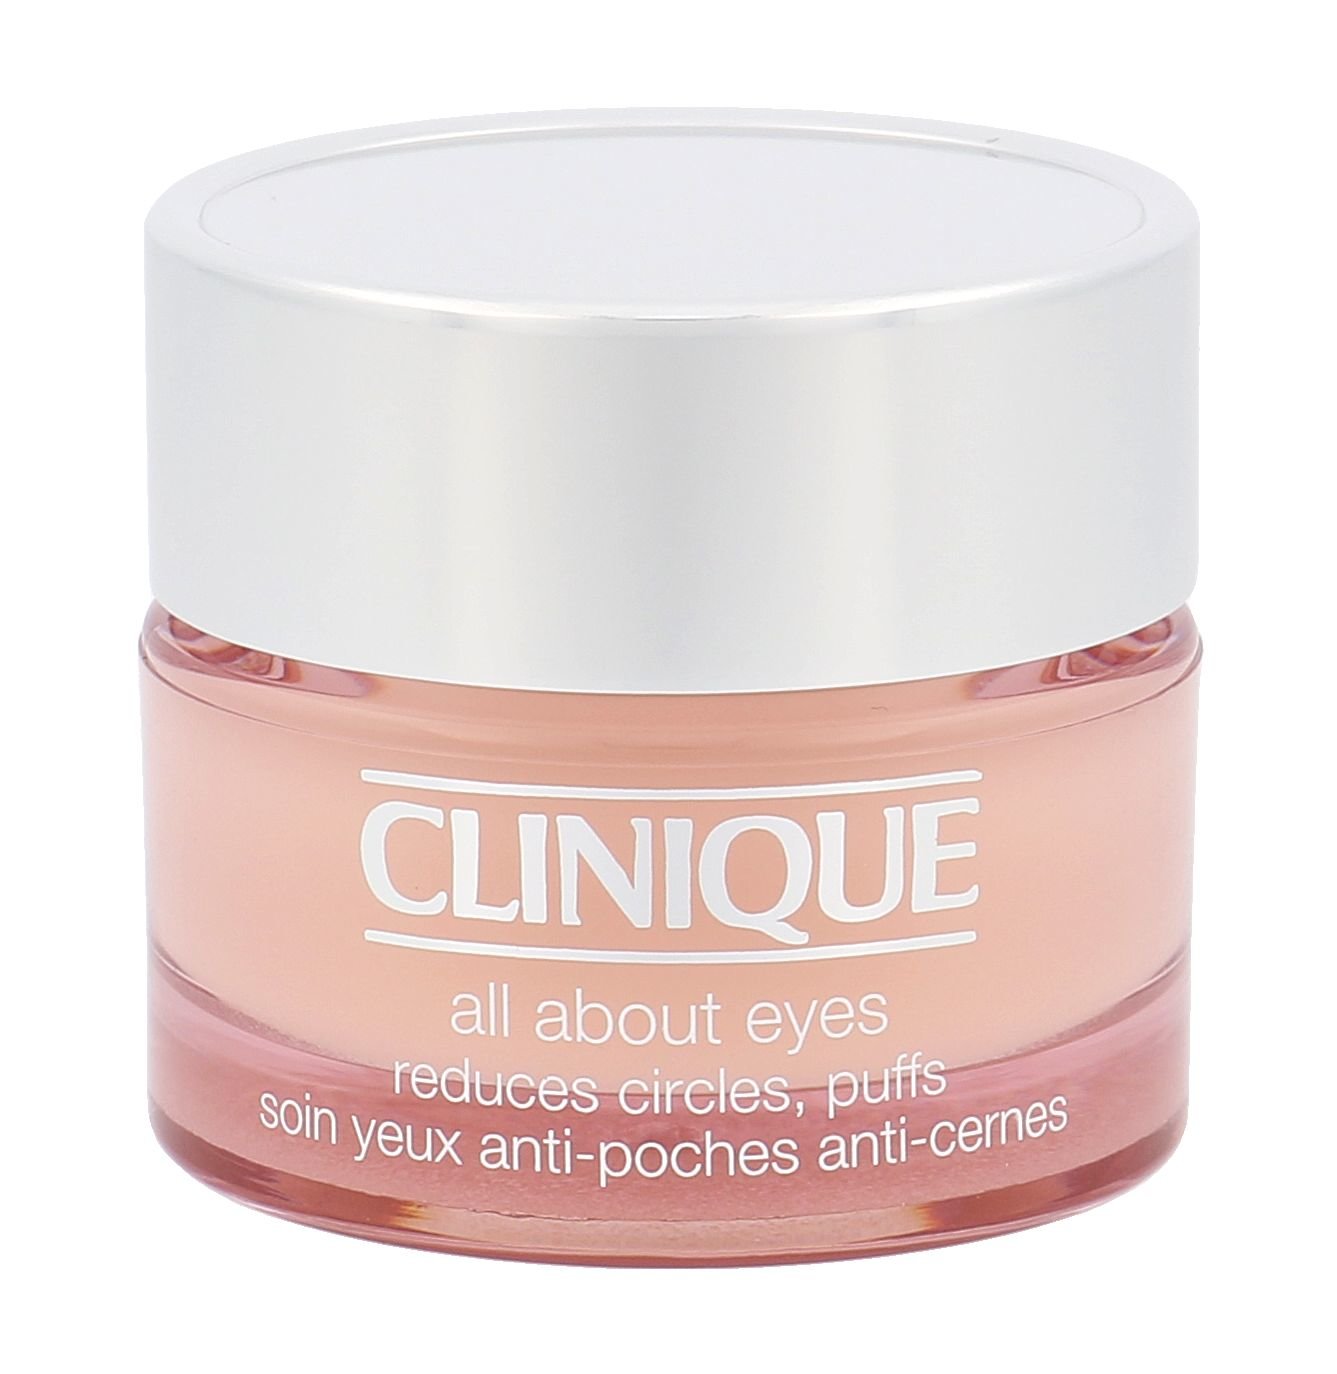 Clinique All About Eyes All Skin